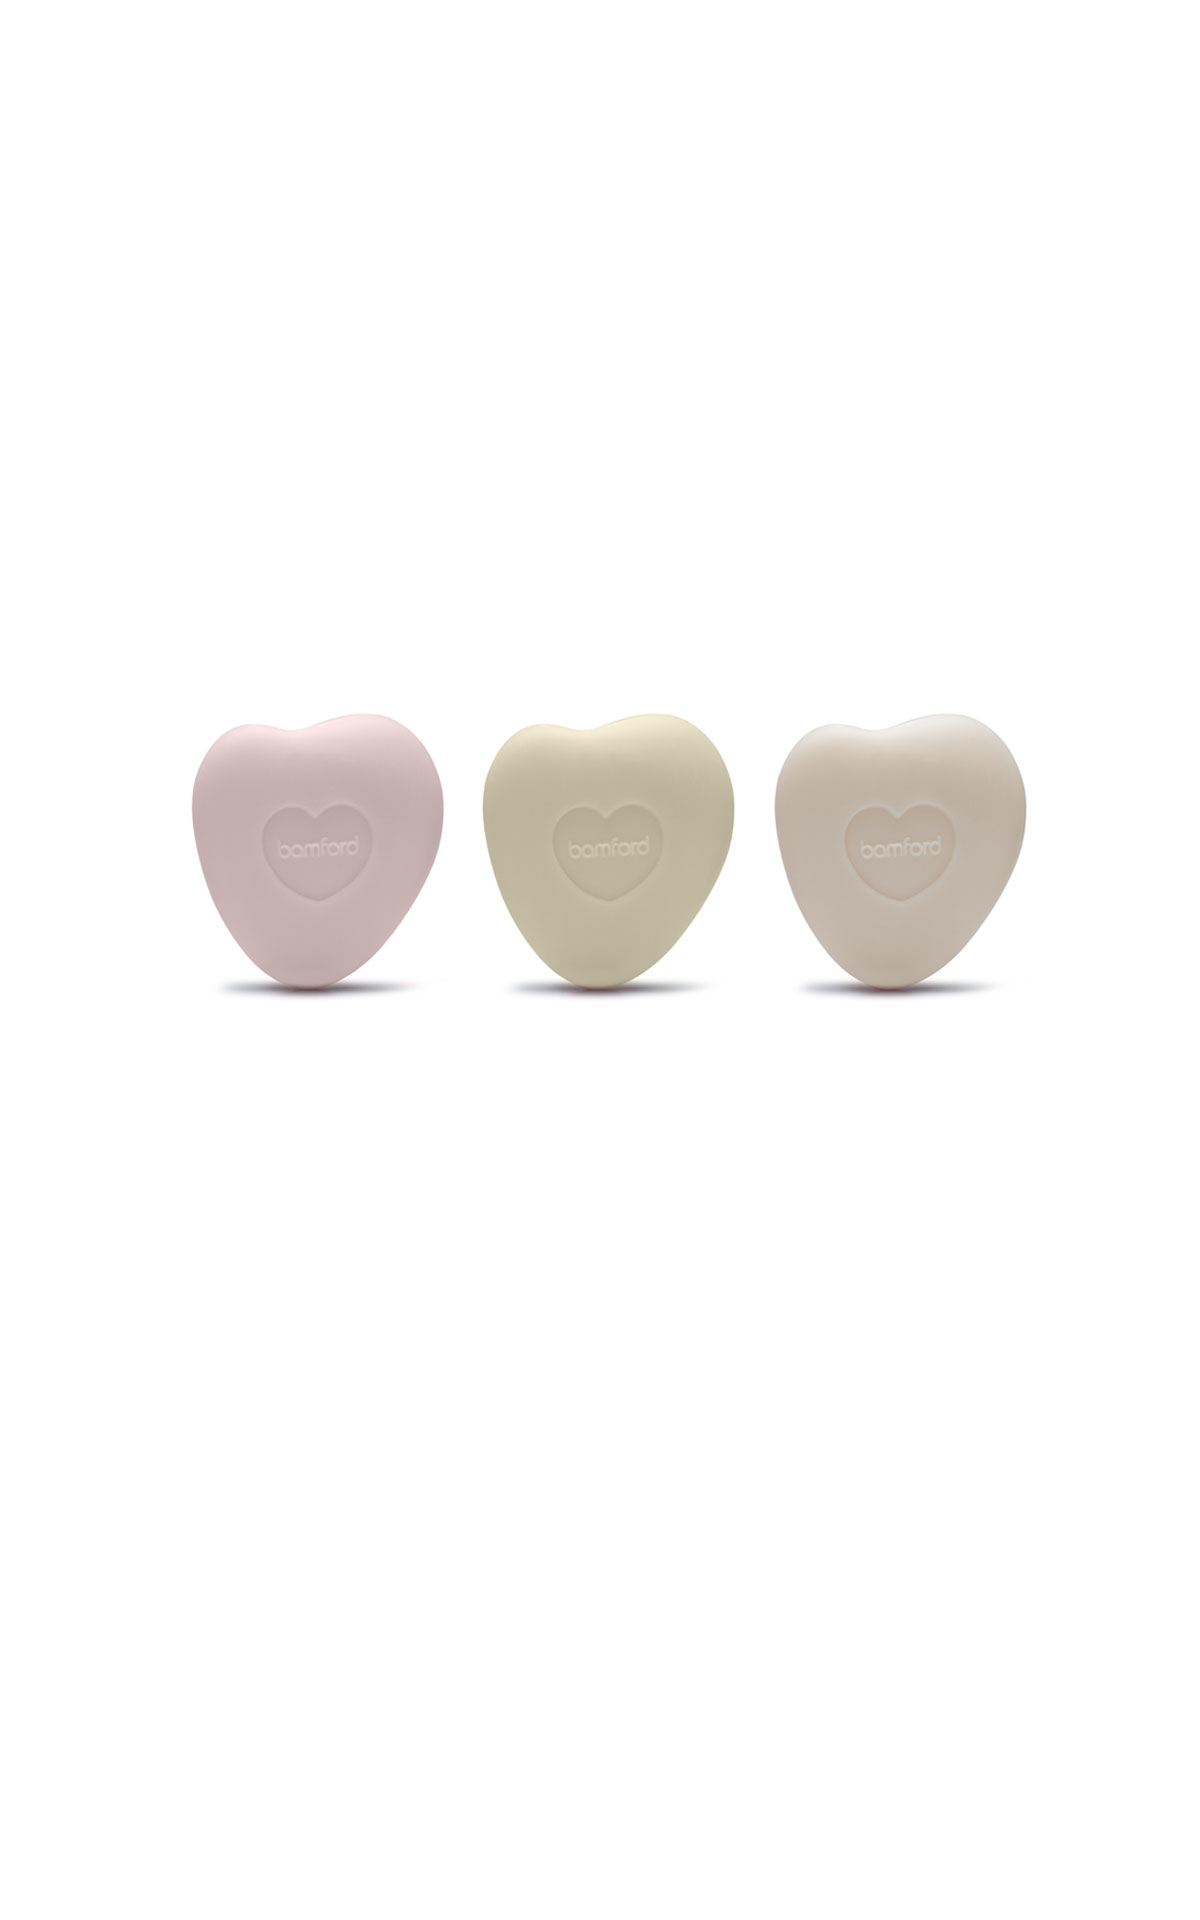 Bamford Pebble soap trio from Bicester Village